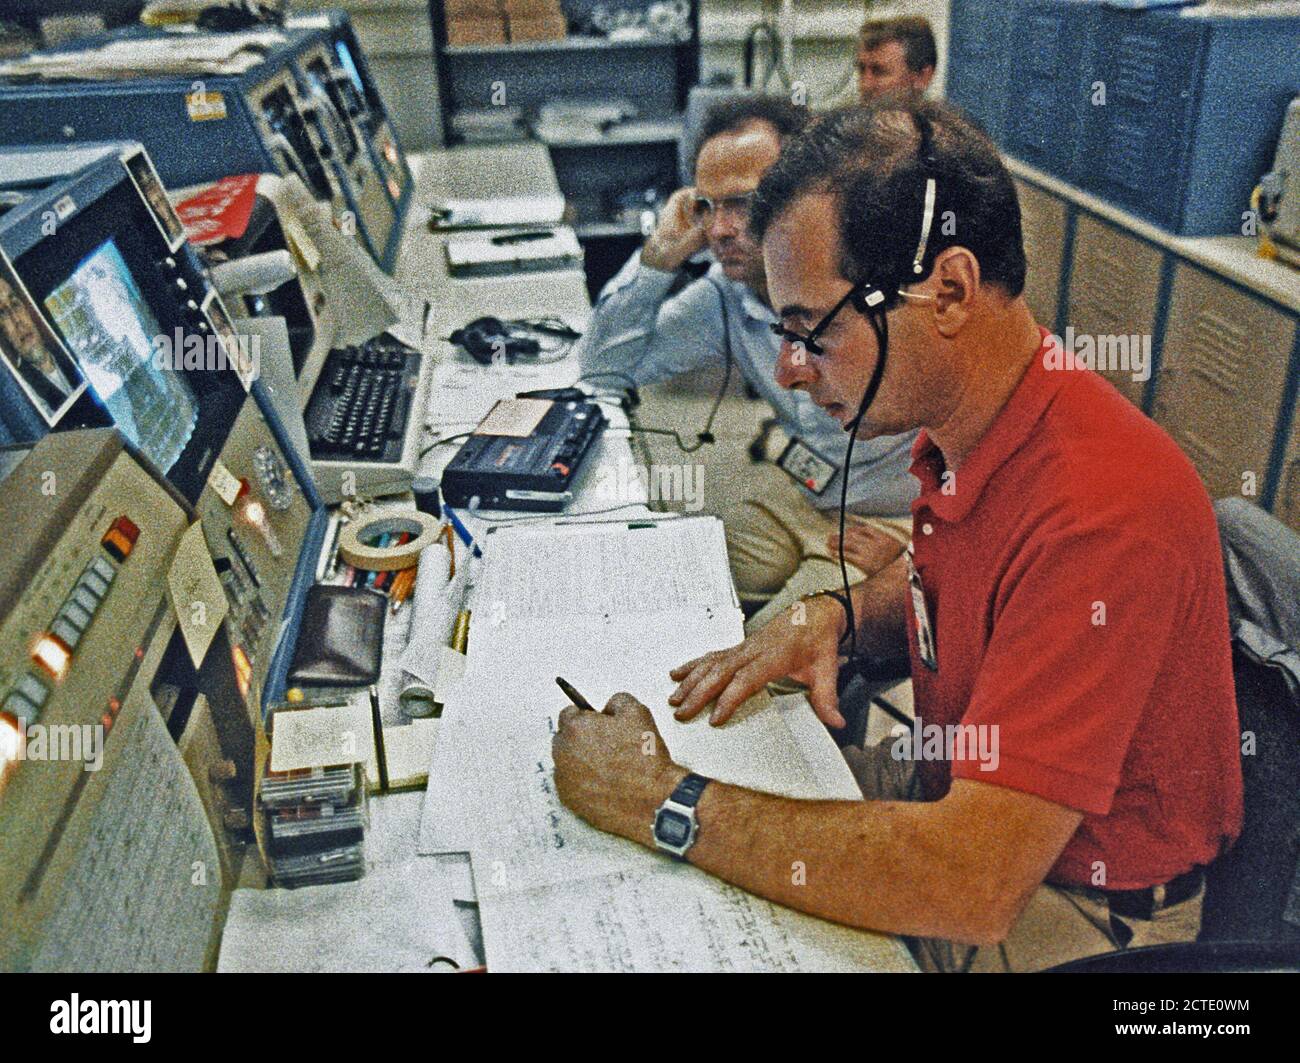 1984 - During a Spacelab flight, the hub of activity was the Payload Operations Control Center (POCC) at the Johnson Space Flight Center (JSC) in Houston, Texas. Stock Photo